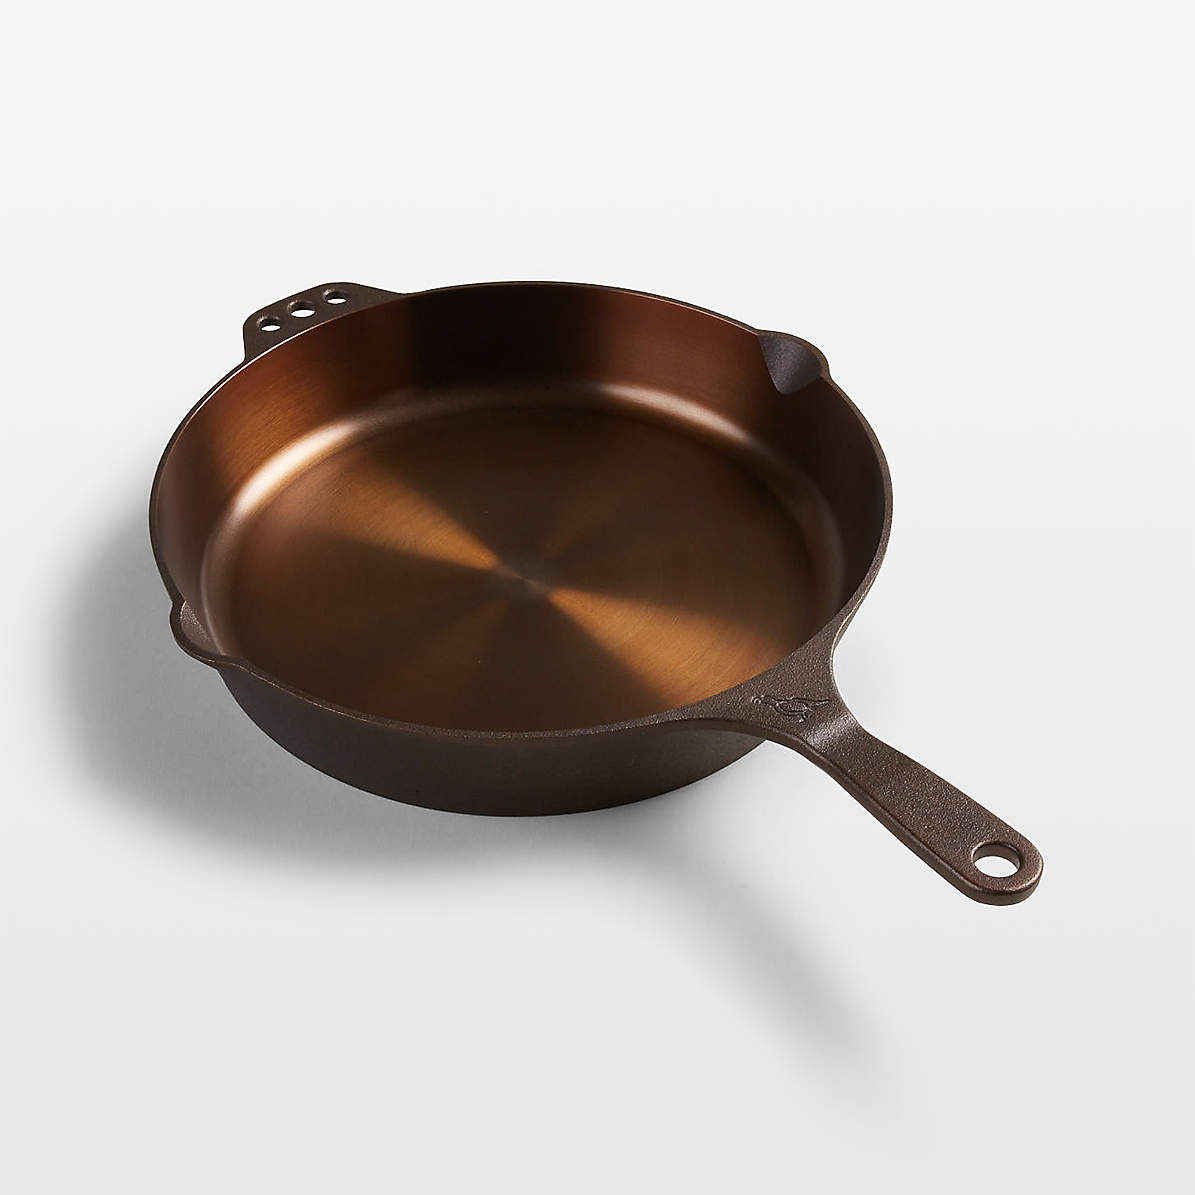 10 Best Cast Iron Skillets and Pans